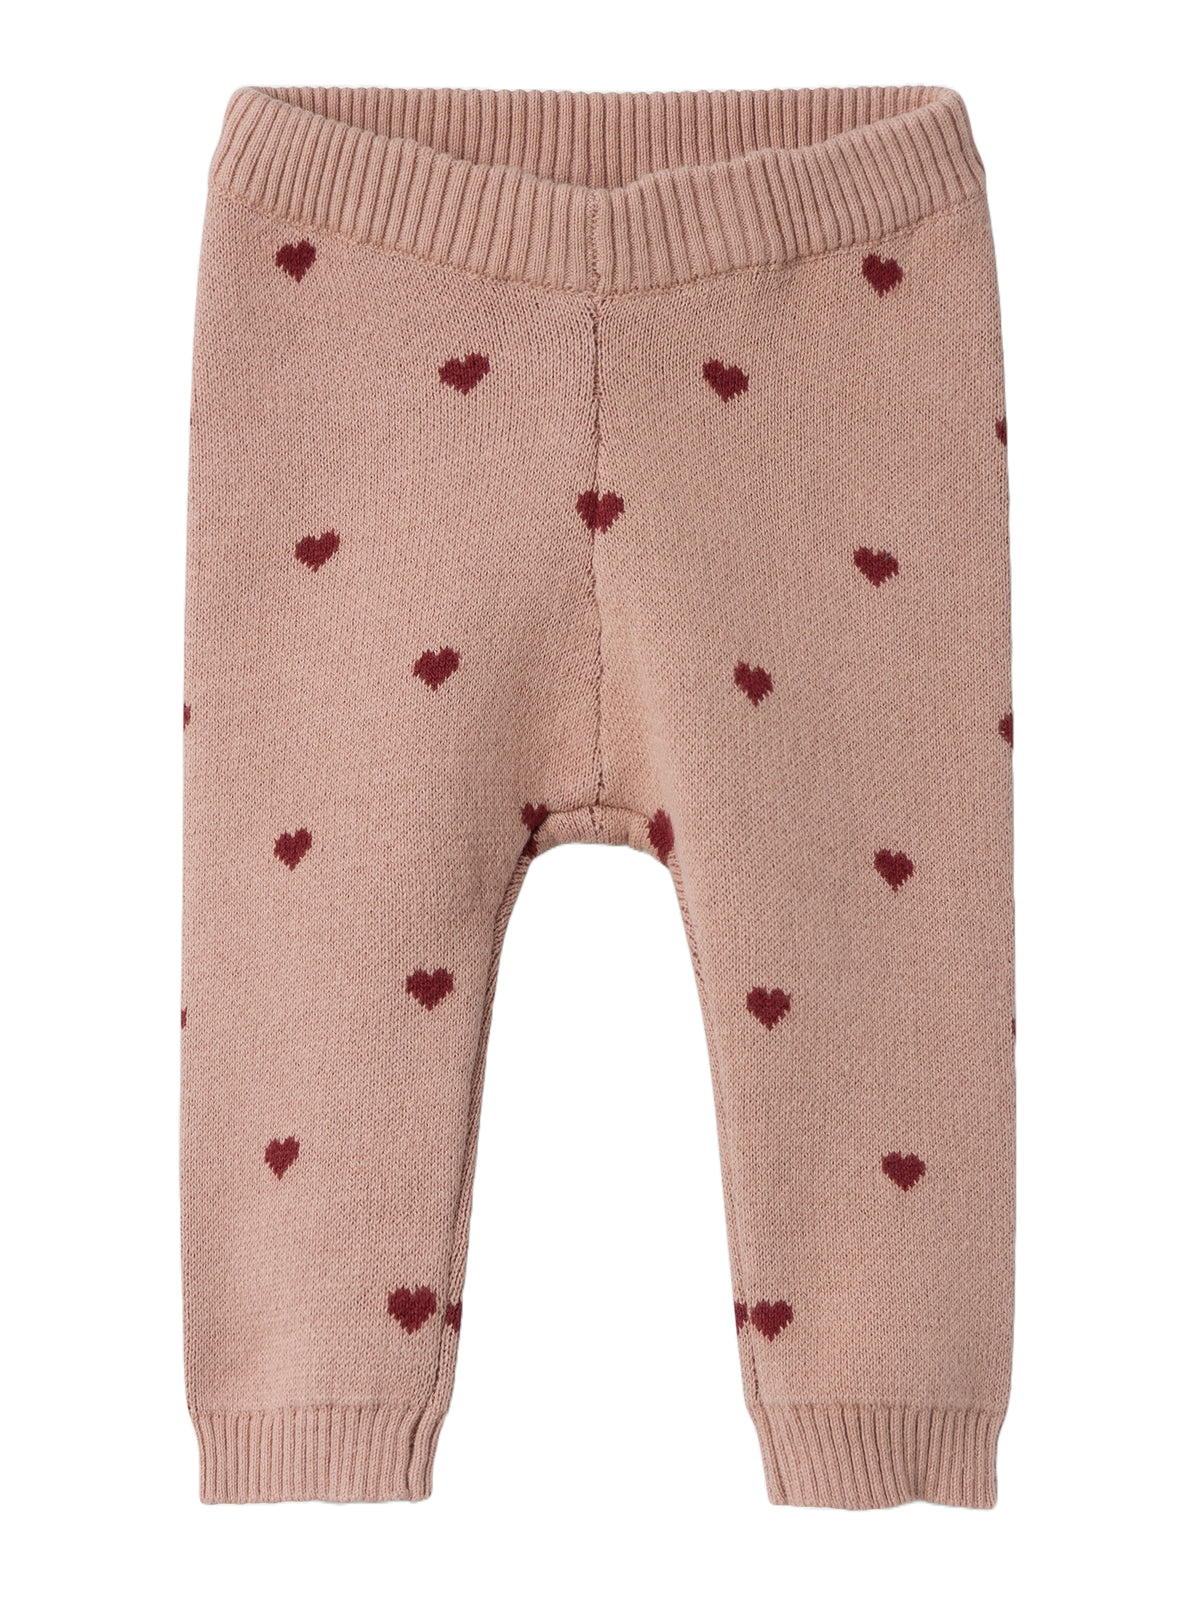 Baby knitted pants Saran hartjes allover, Lil Atelier